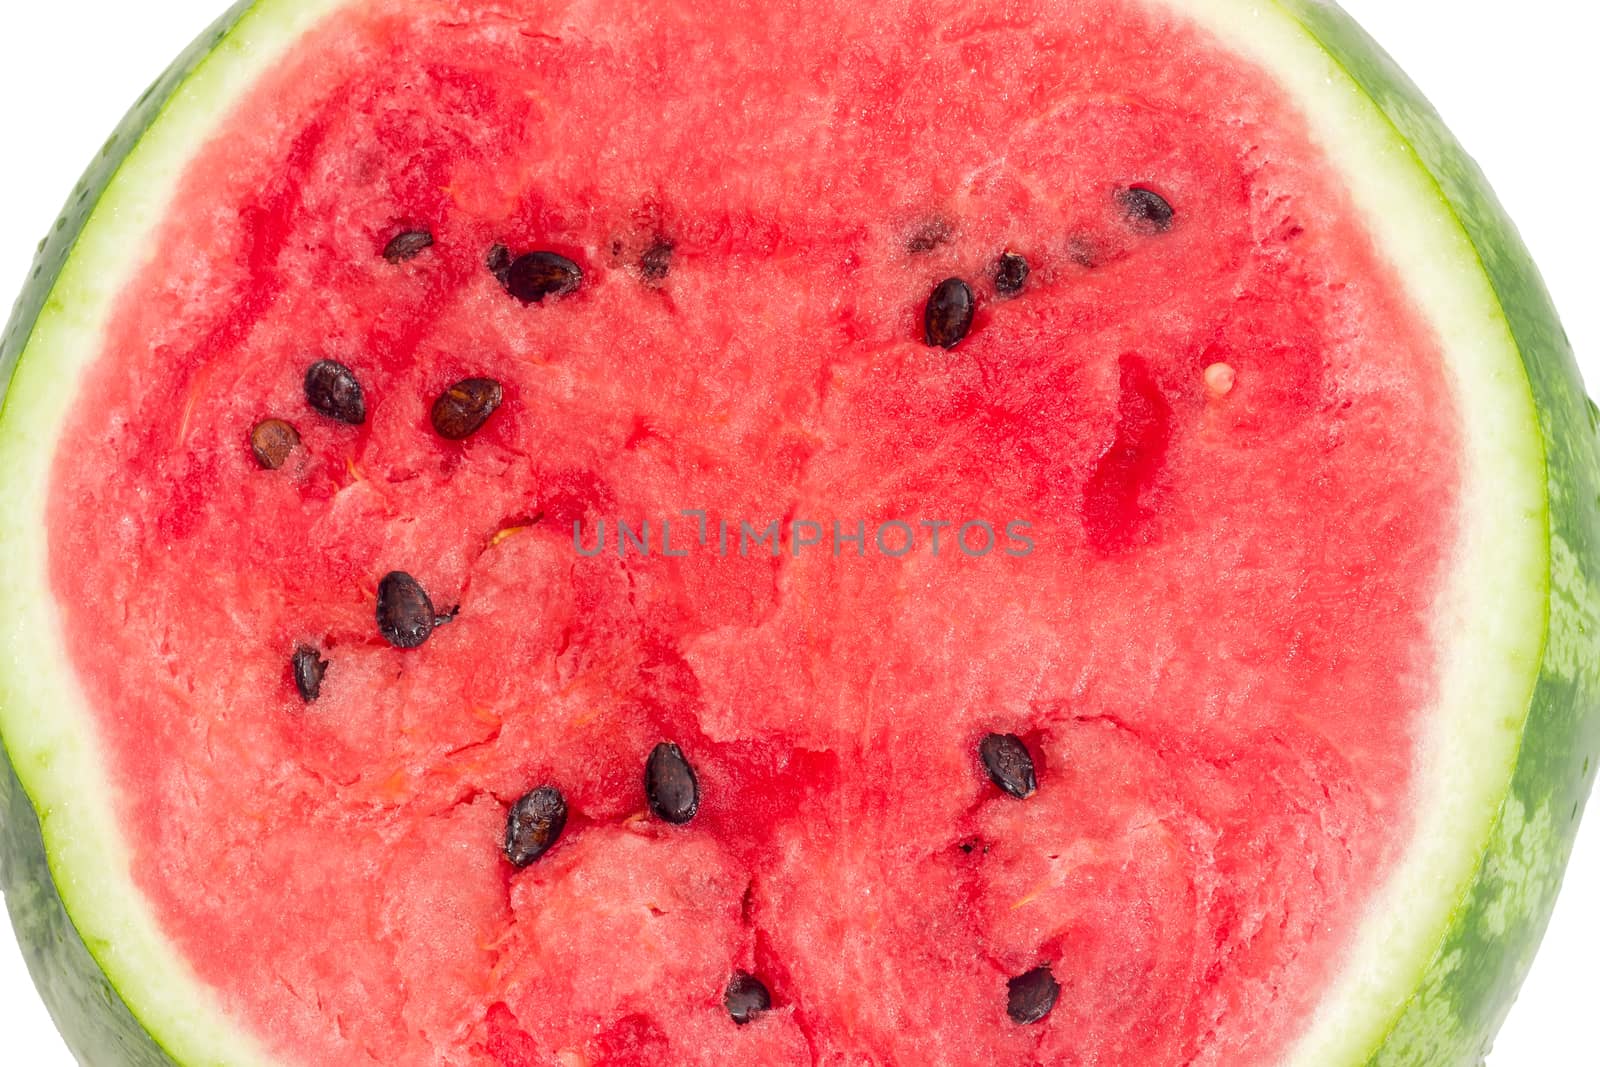 Background of a cut of the watermelon with deep red flesh and seeds on a white background
